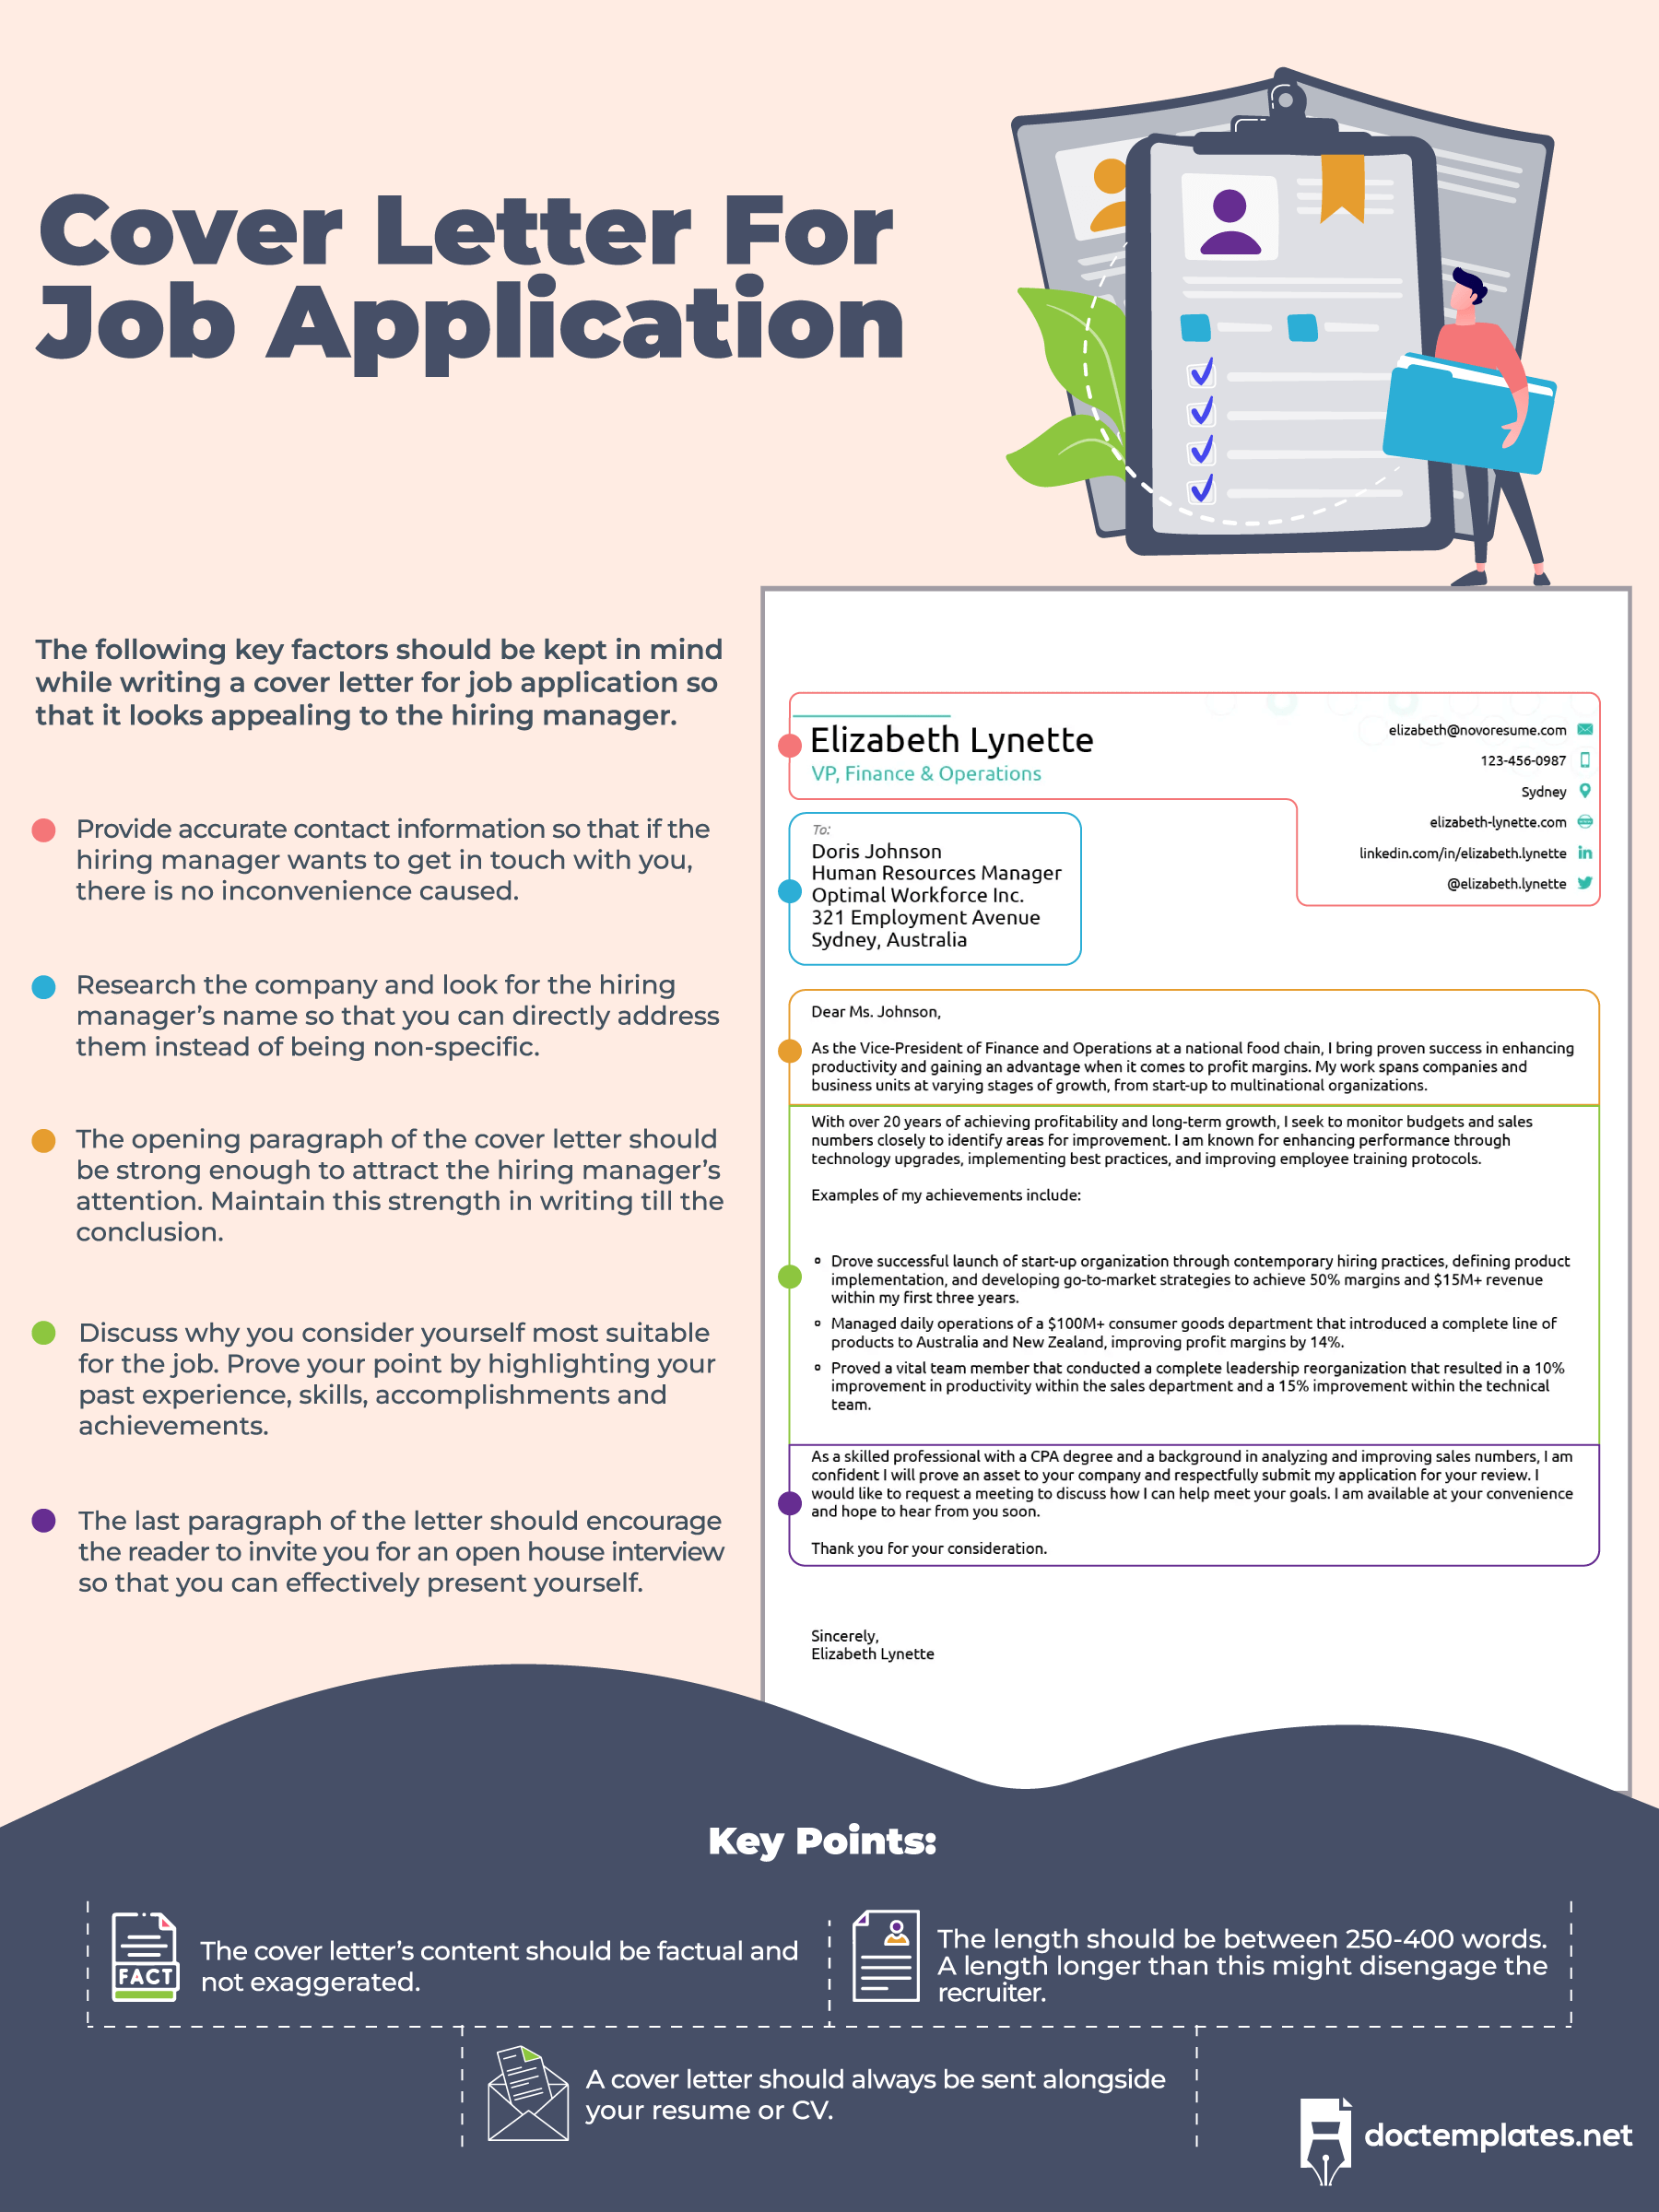 This infographic is about job application cover letter.